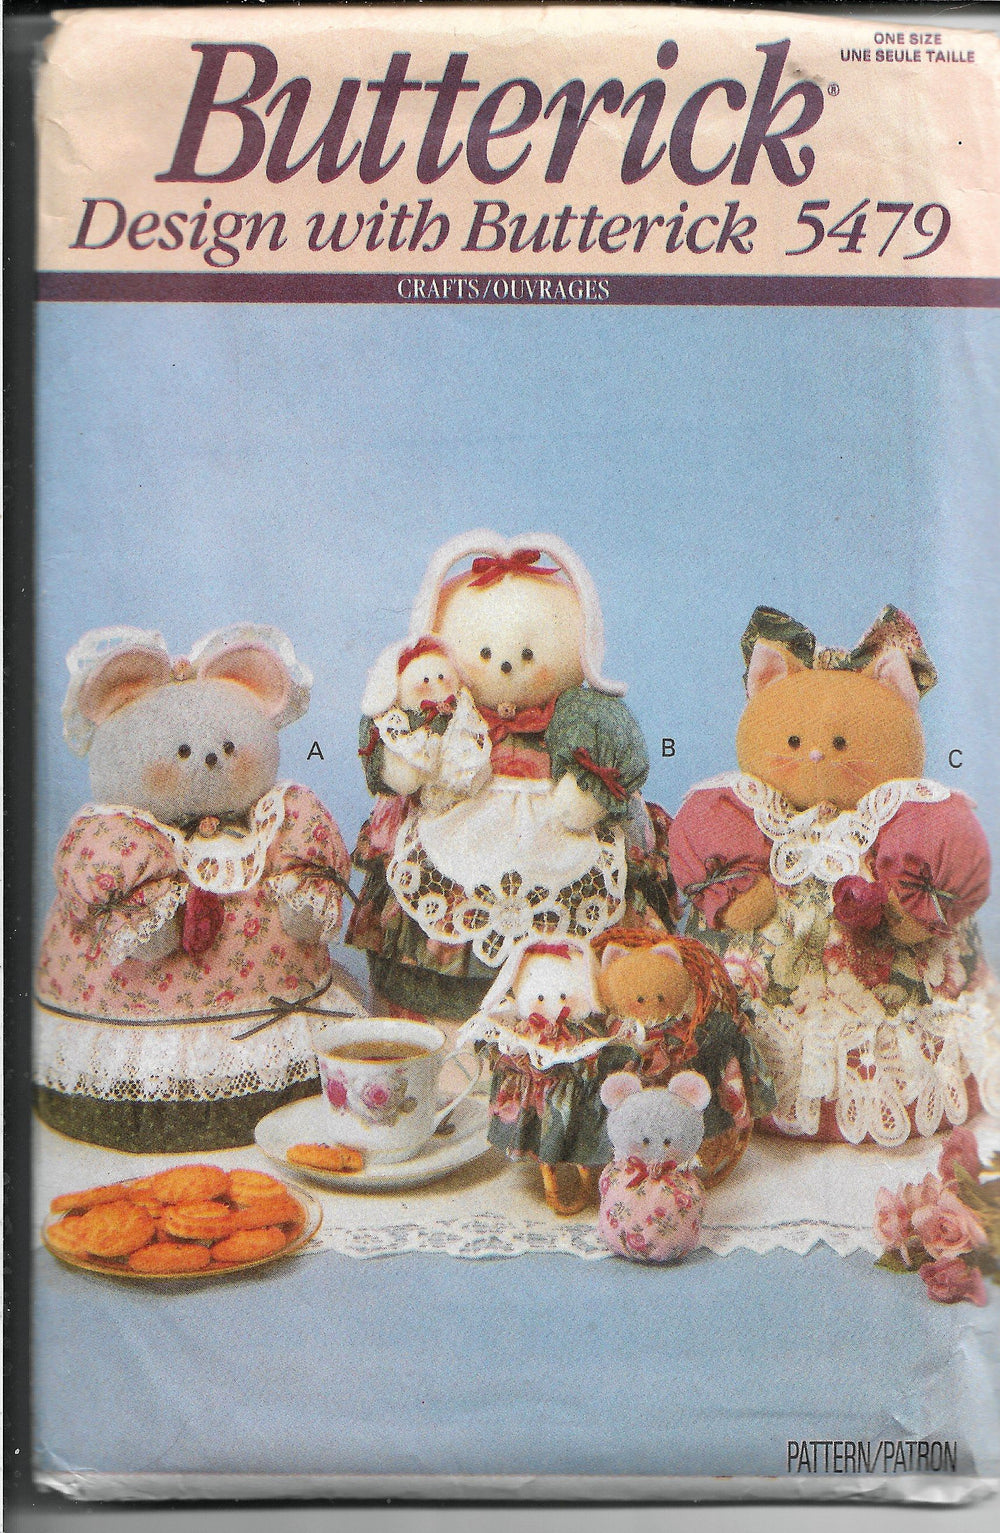 Butterick 5479 Cookie Tin Cover Mouse Bunny Kitten Sewing Craft Pattern 1990s - VintageStitching - Vintage Sewing Patterns